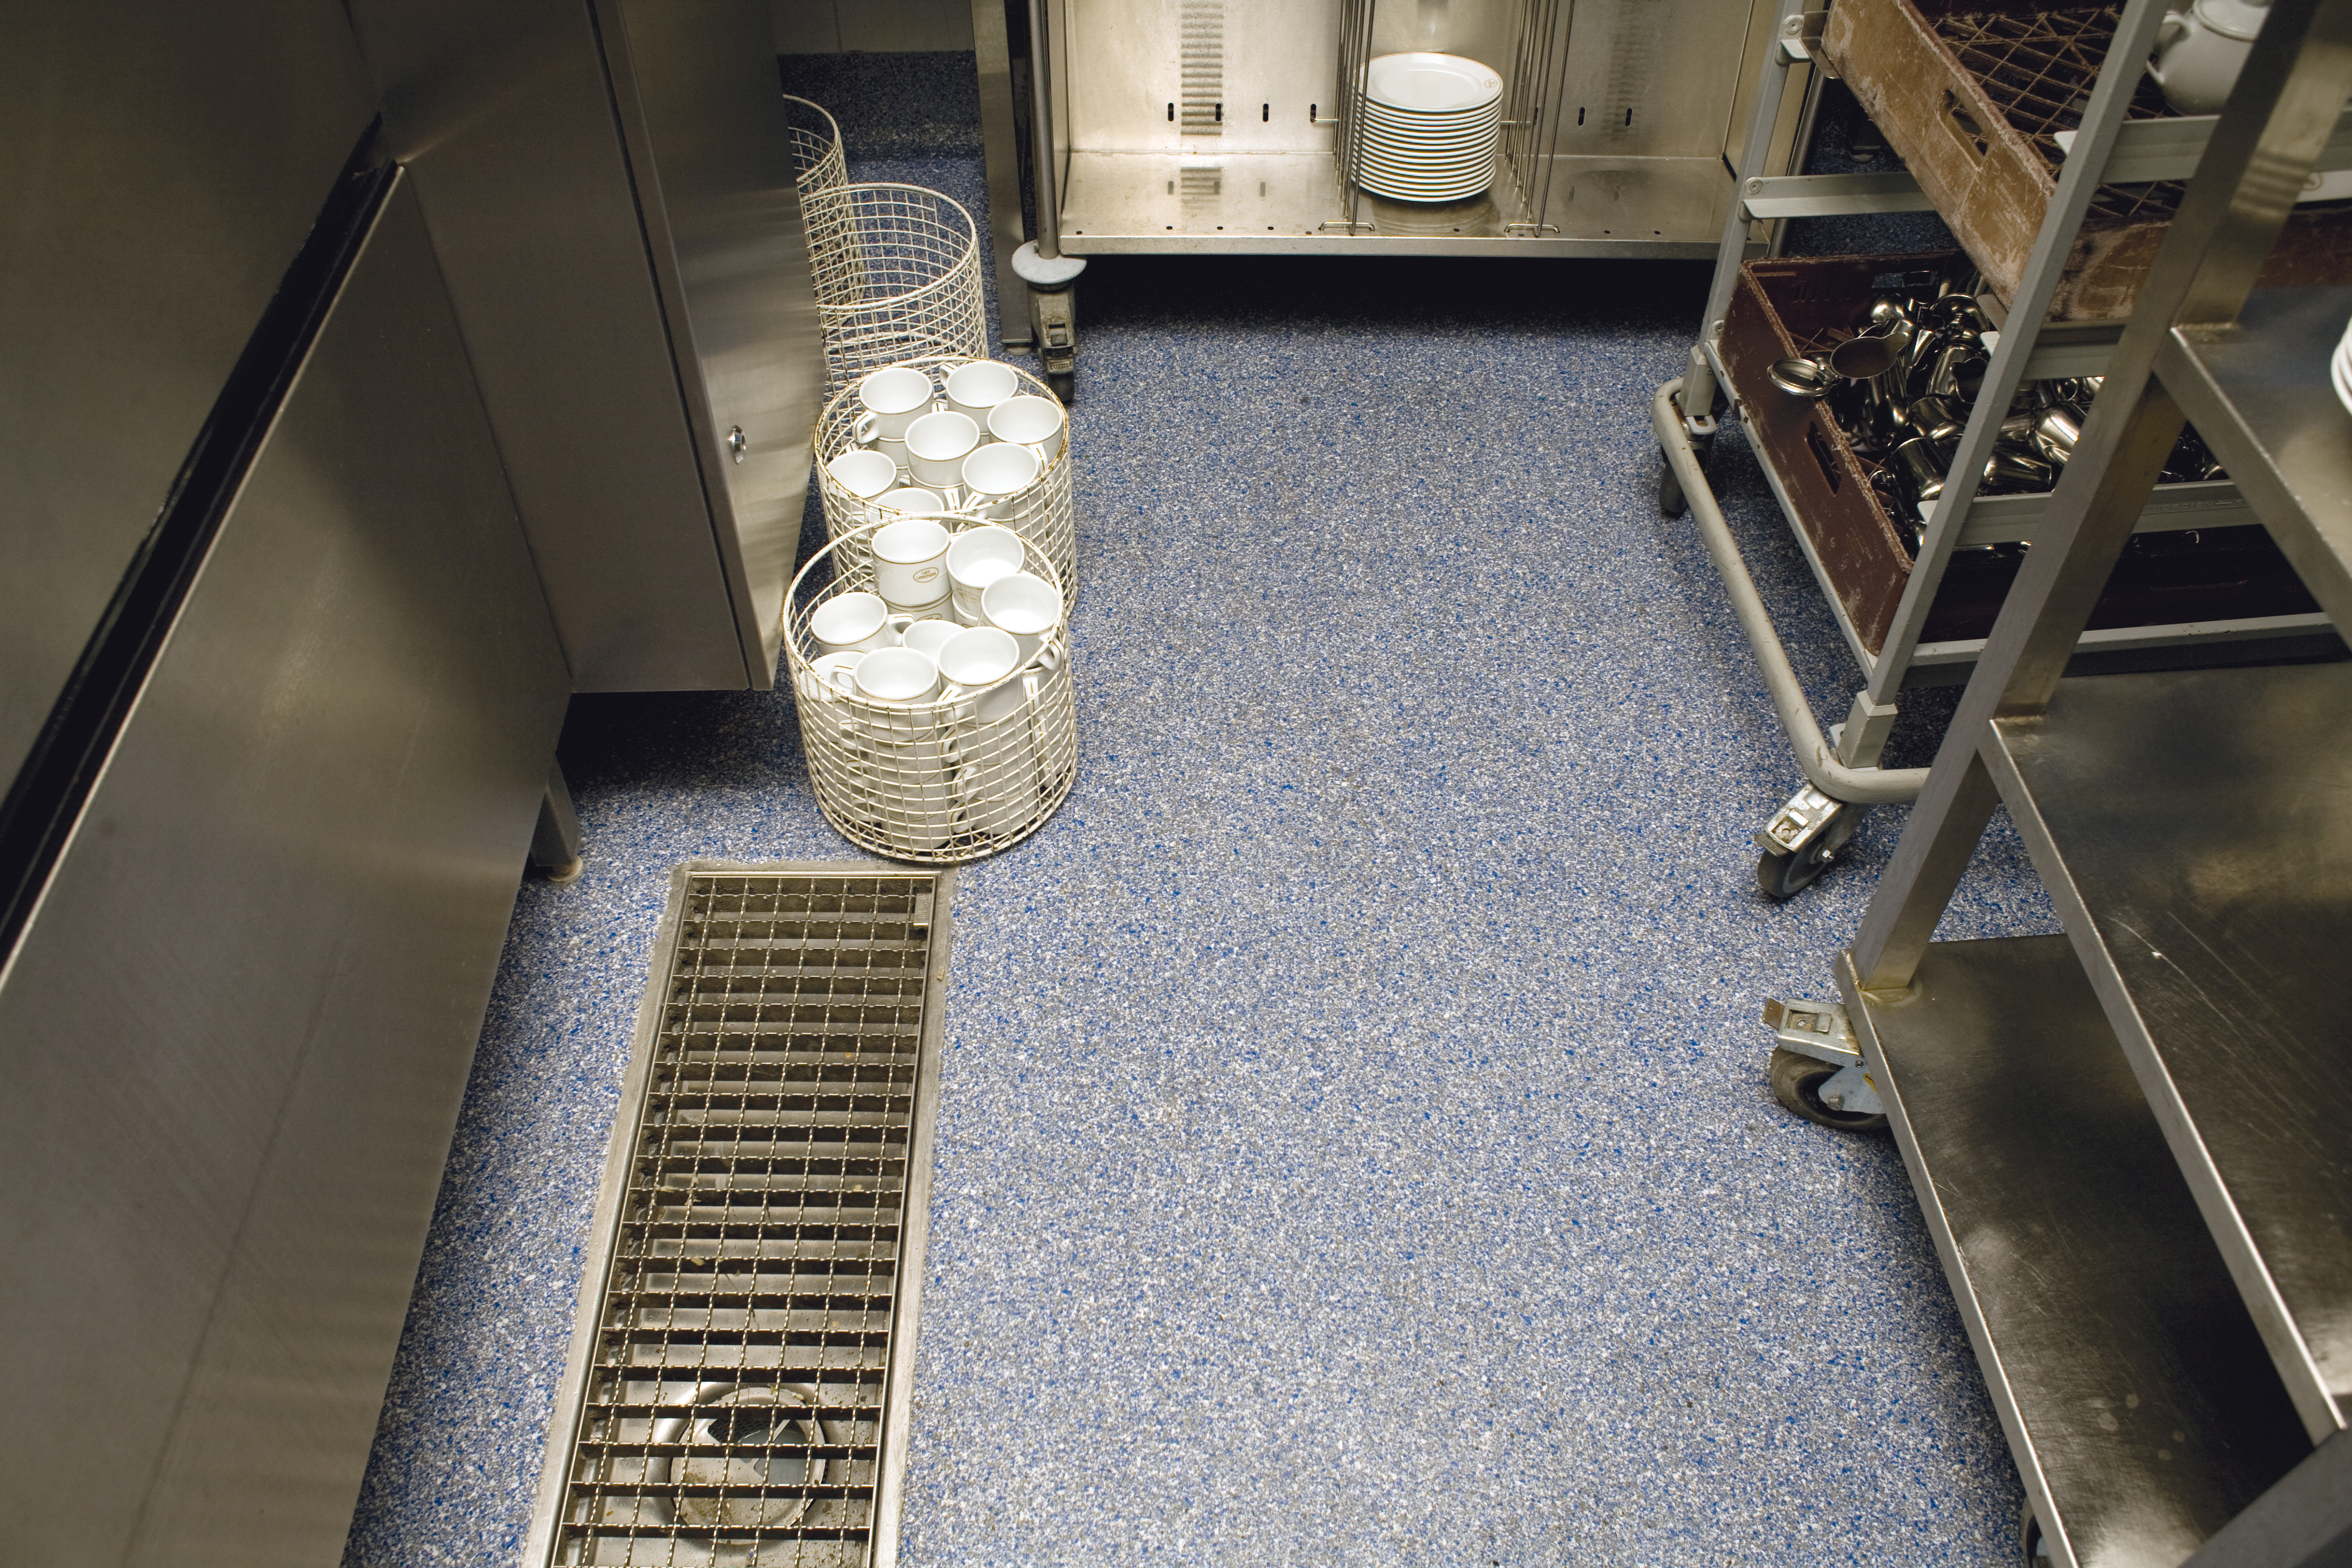 Commercial Kitchen Flooring Best, What Is The Best Type Of Flooring For A Commercial Kitchen